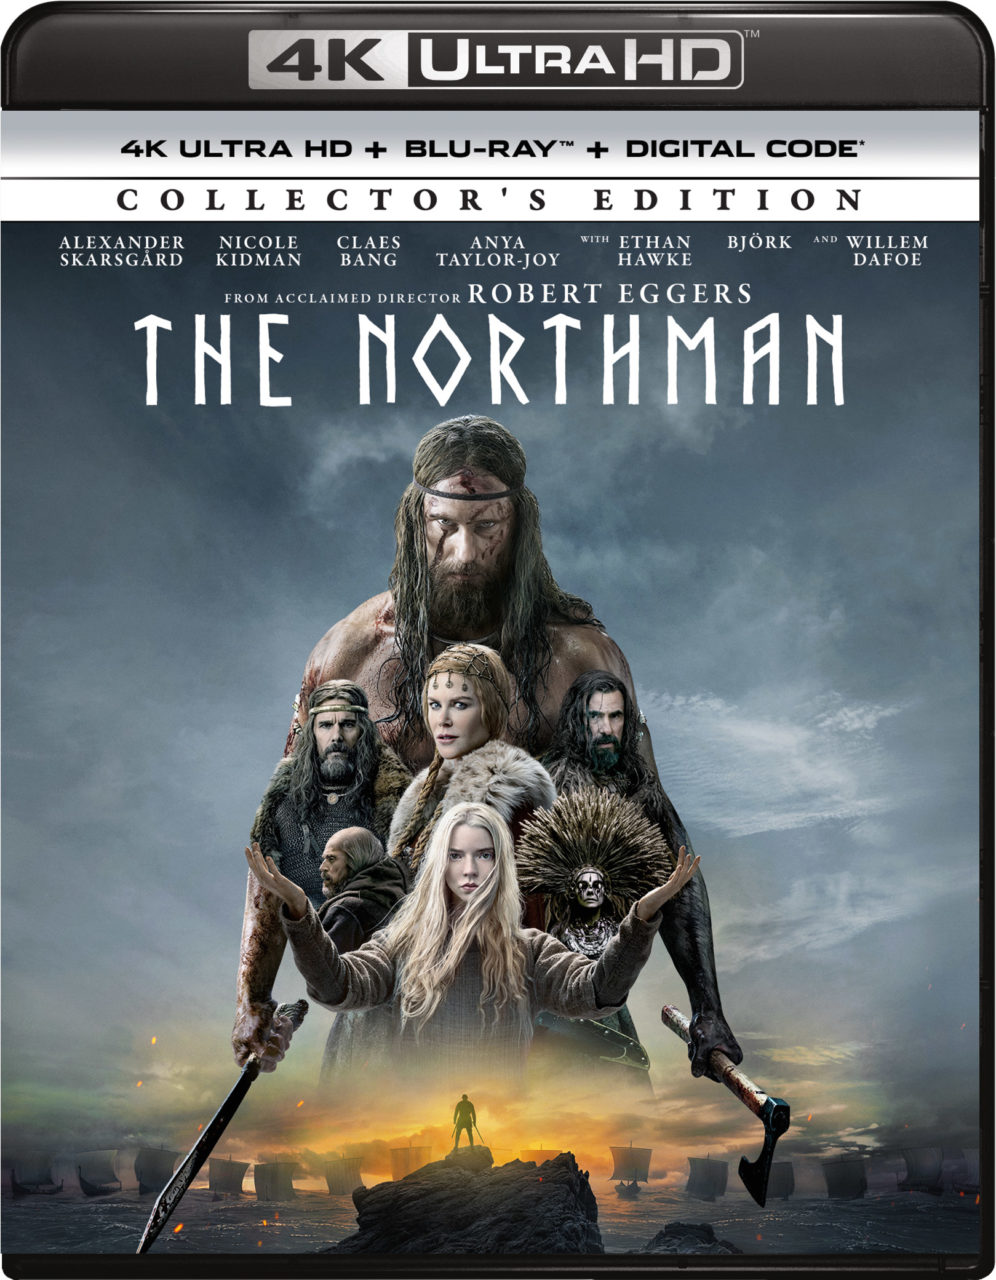 The Northman 4K Ultra HD Collector's Edition cover (Universal Pictures Home Entertainment)